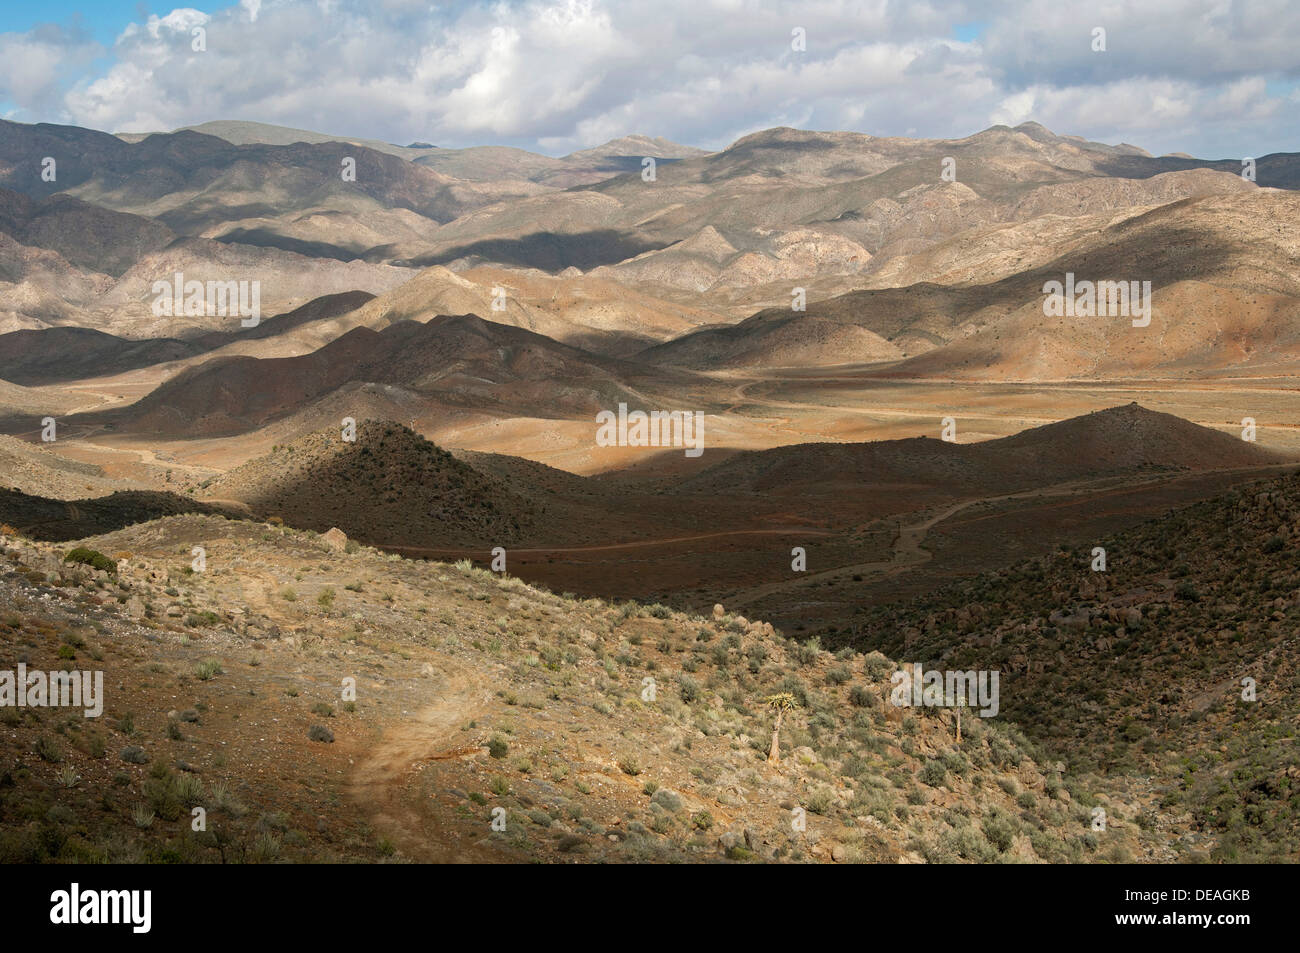 Interplay of light and shadow on a hilly landscape, Richtersveld, Richtersveld Nationalpark, Northern Cape, South Africa Stock Photo